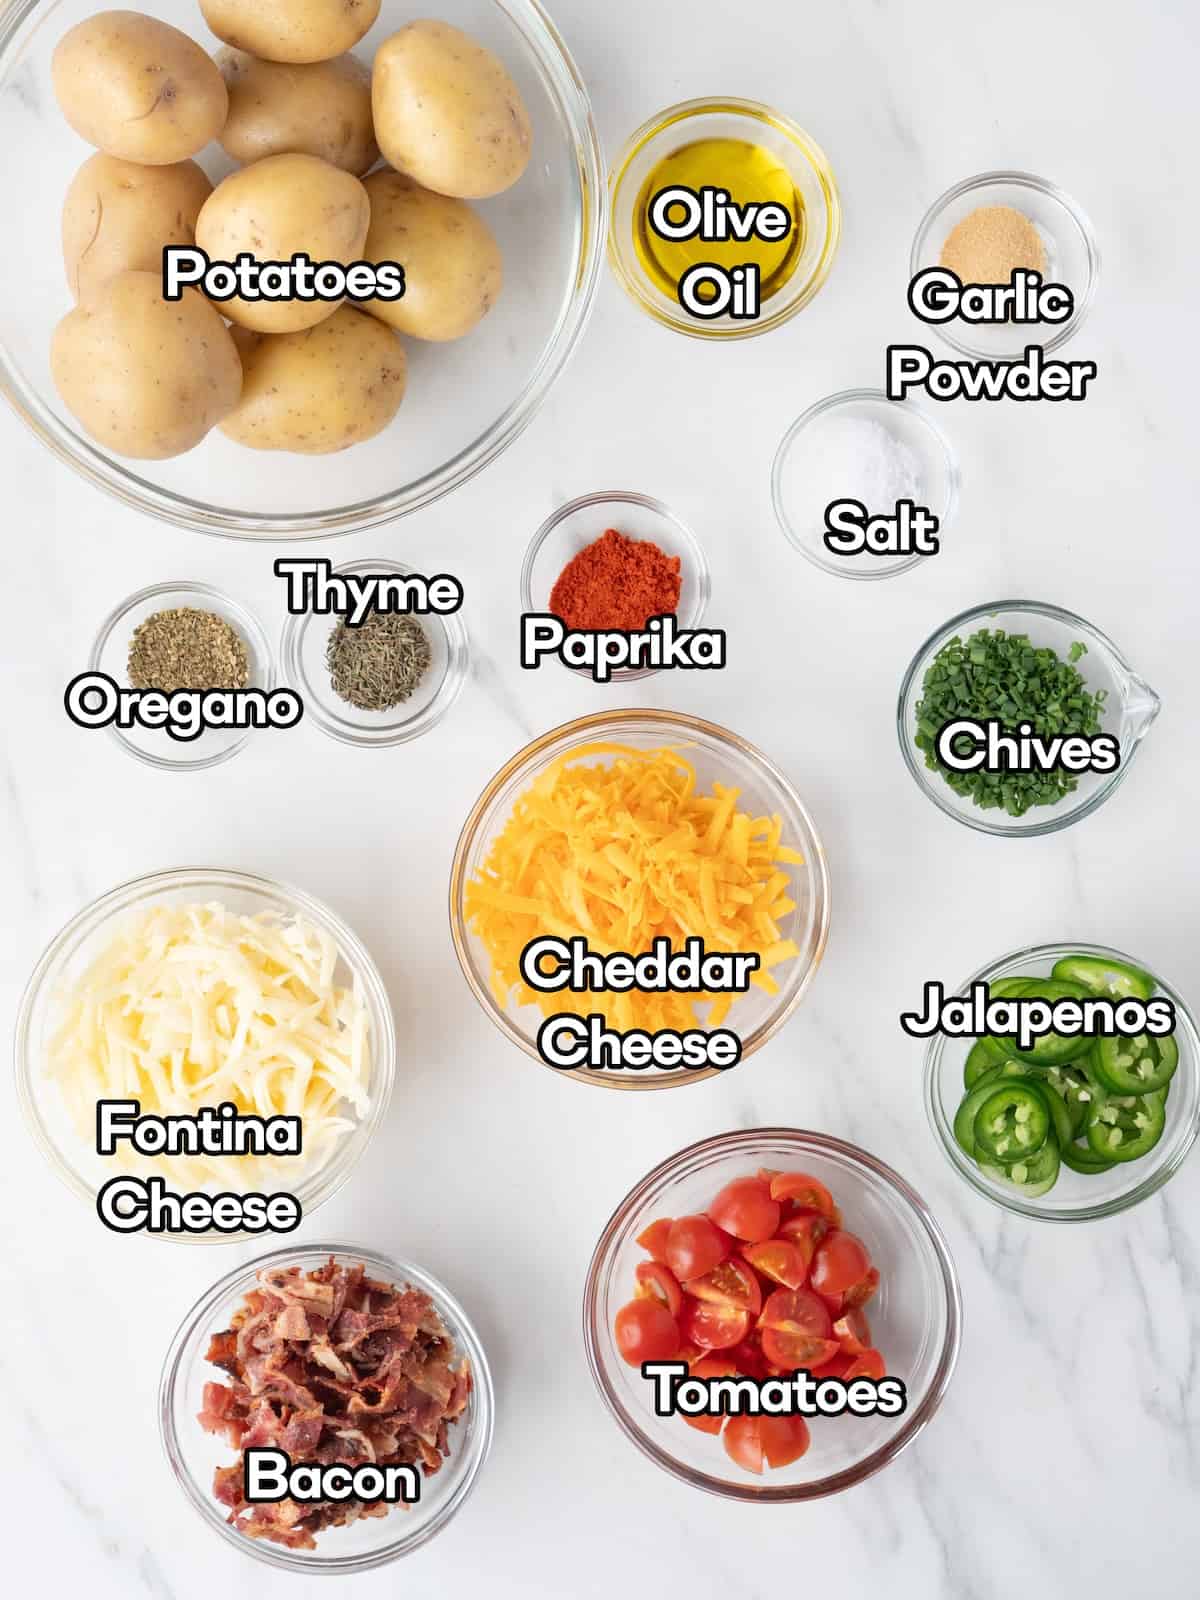 Mise-en-place of all the ingredients to make jalapeño bacon loaded potatoes